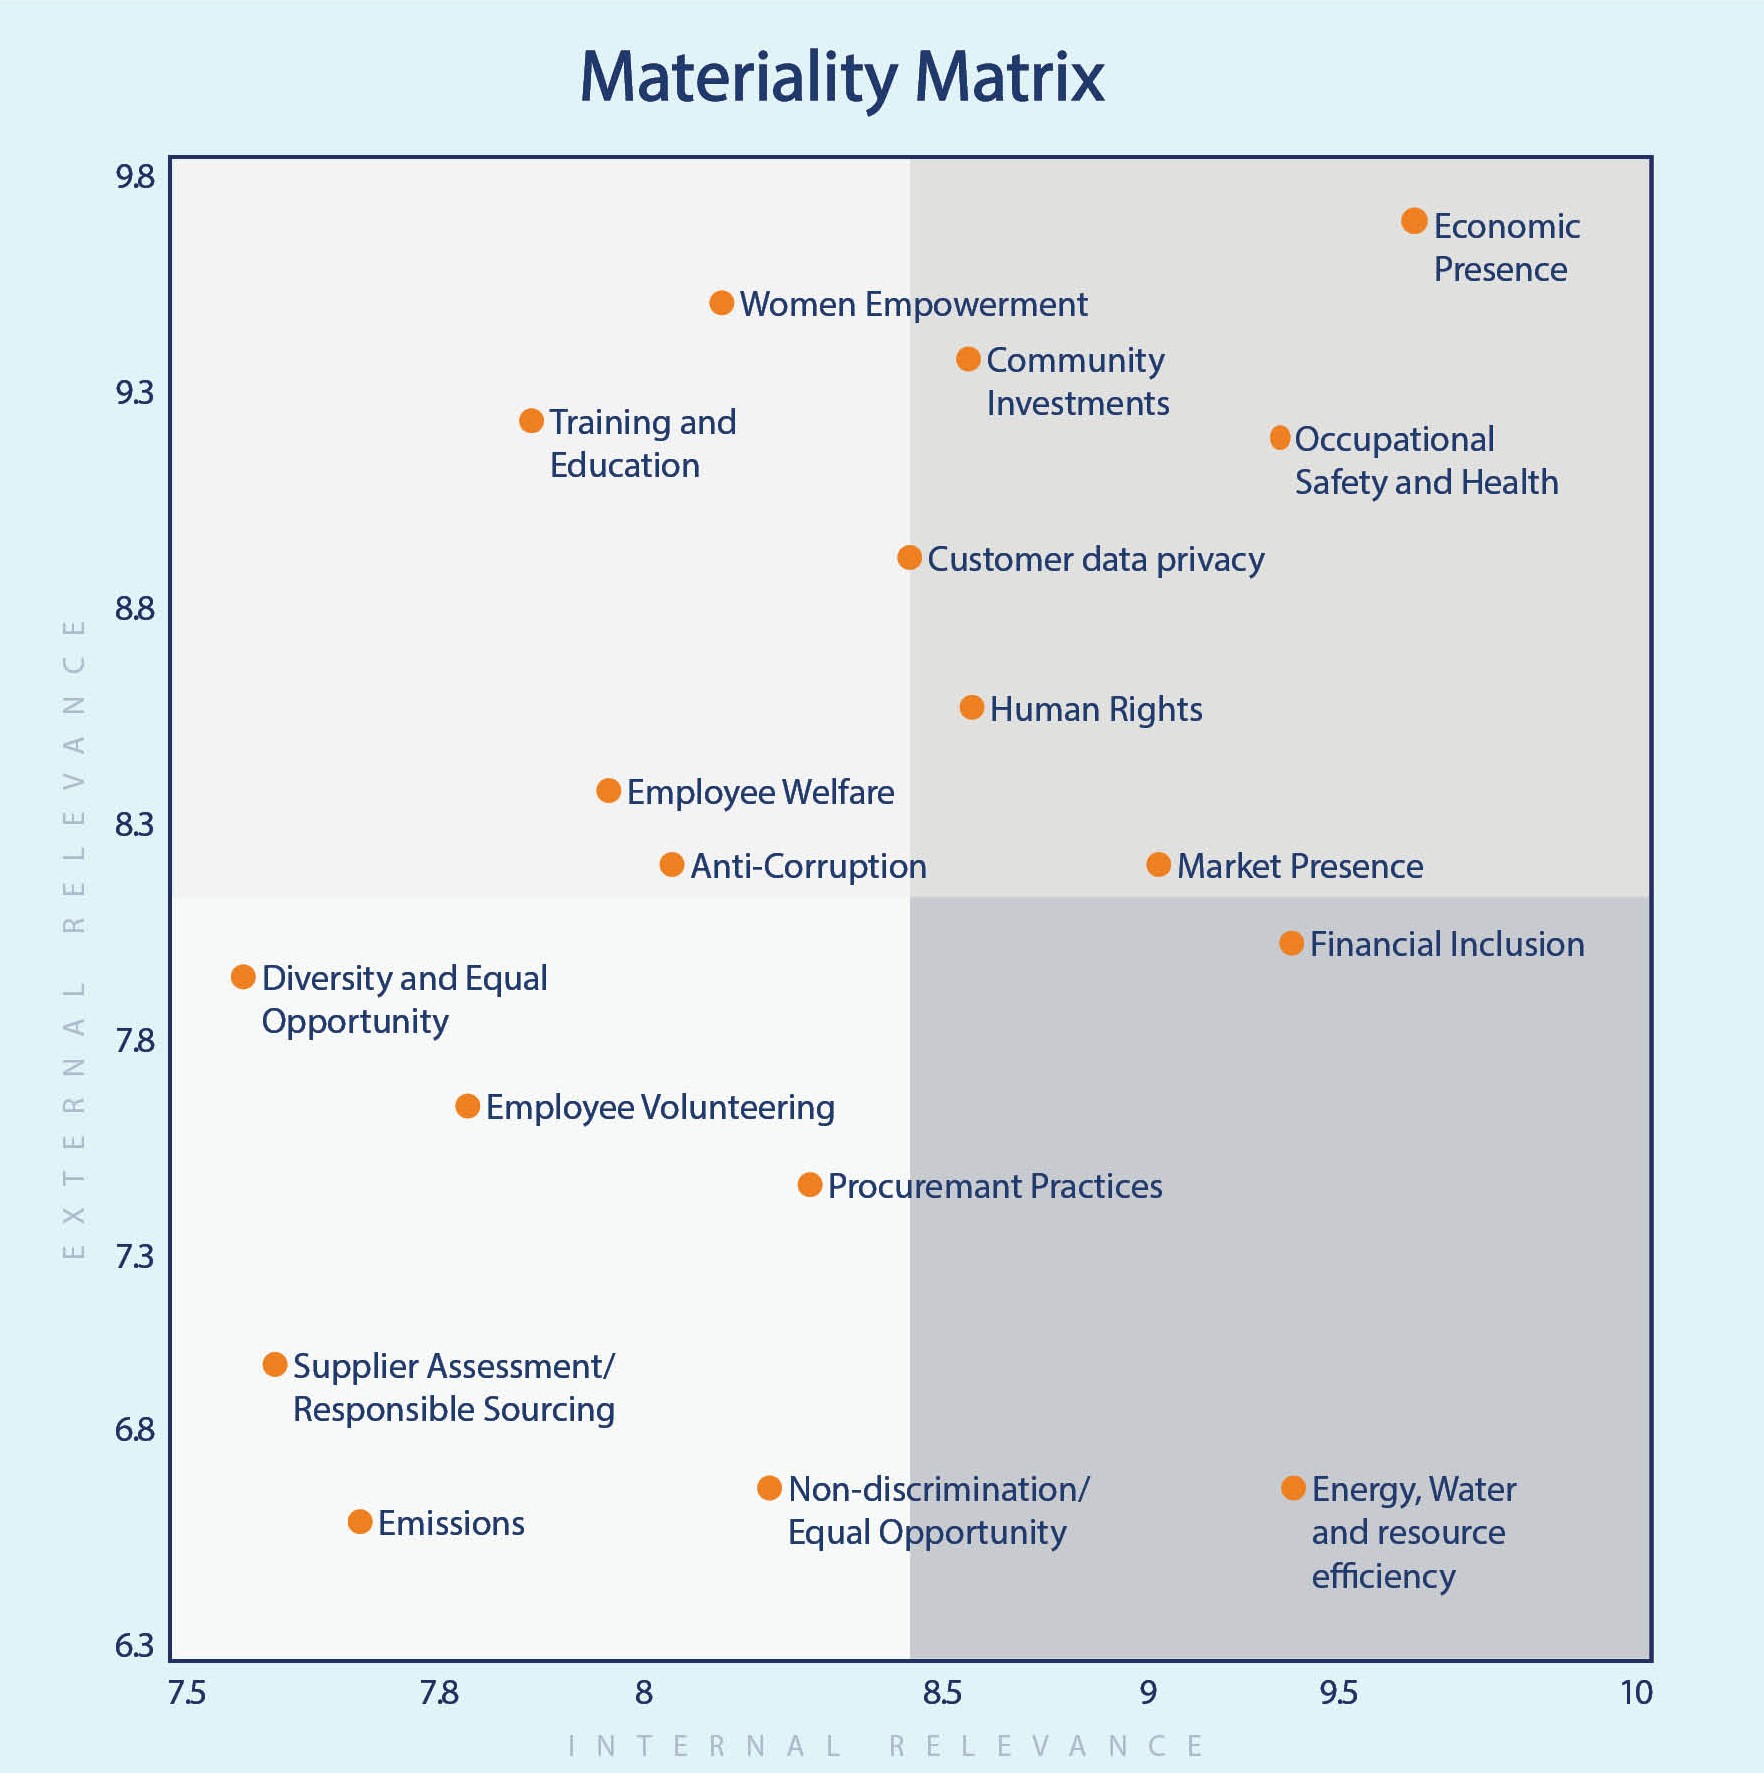 Materiality index